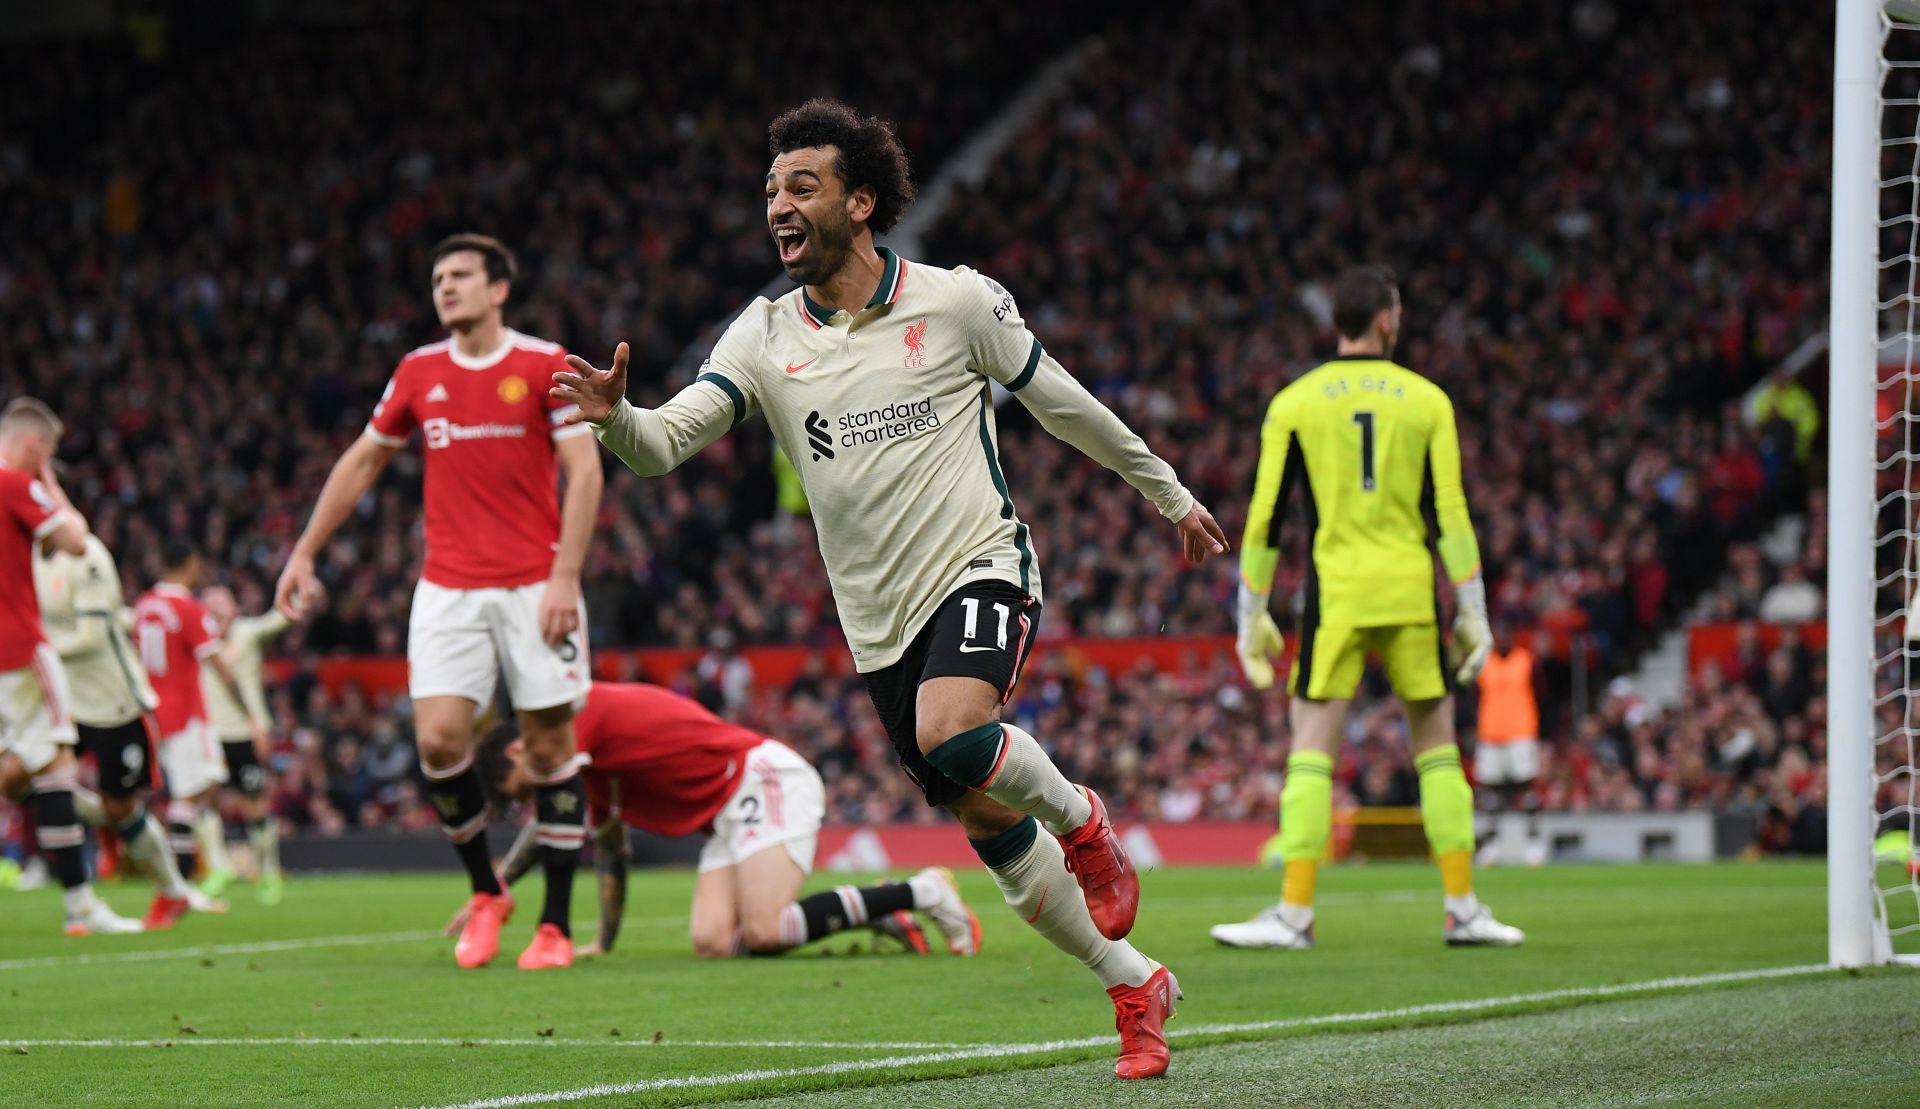 Will there be more happy faces for Liverpool when they face Manchester United next month?